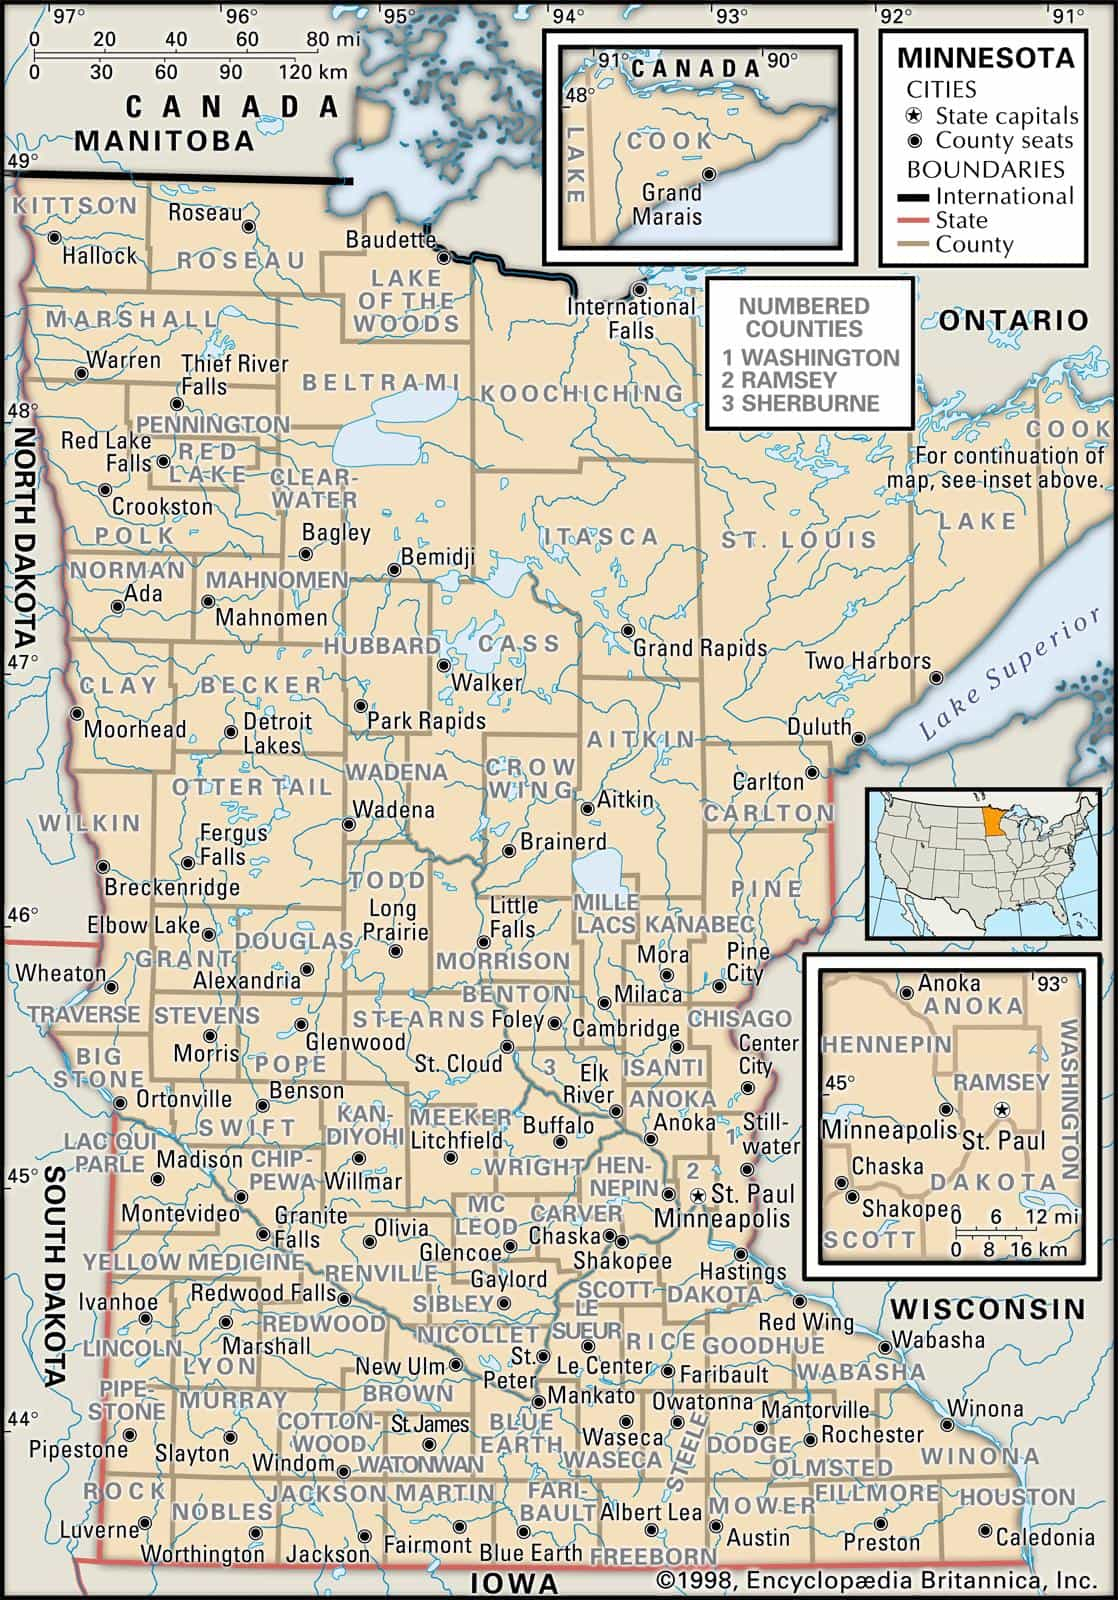 Historical Facts Of Minnesota Counties Guide